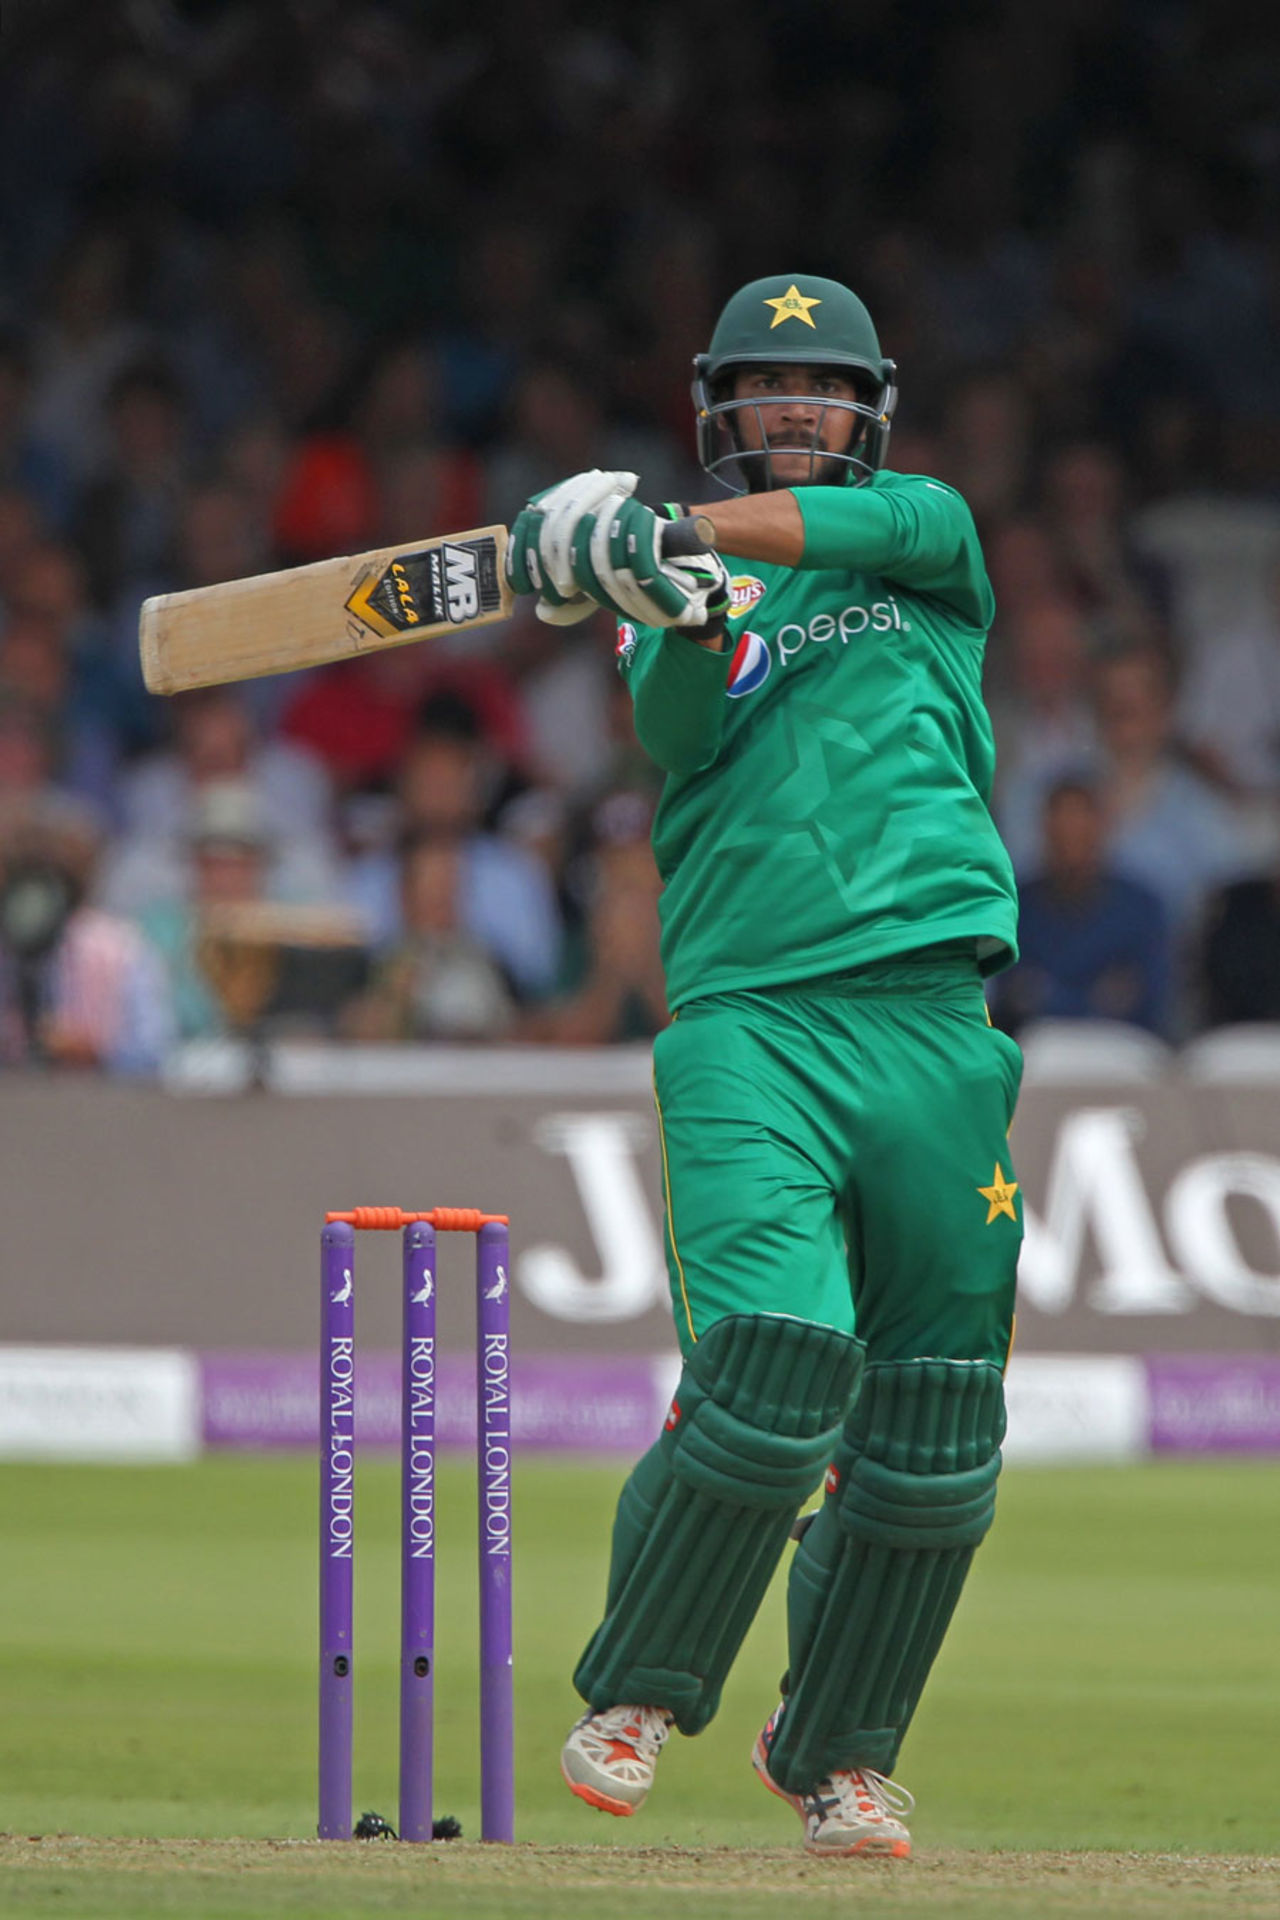 Imad Wasim picked up the pace after a cautious start to his innings, England v Pakistan, 2nd ODI, Lord's, August 27, 2016